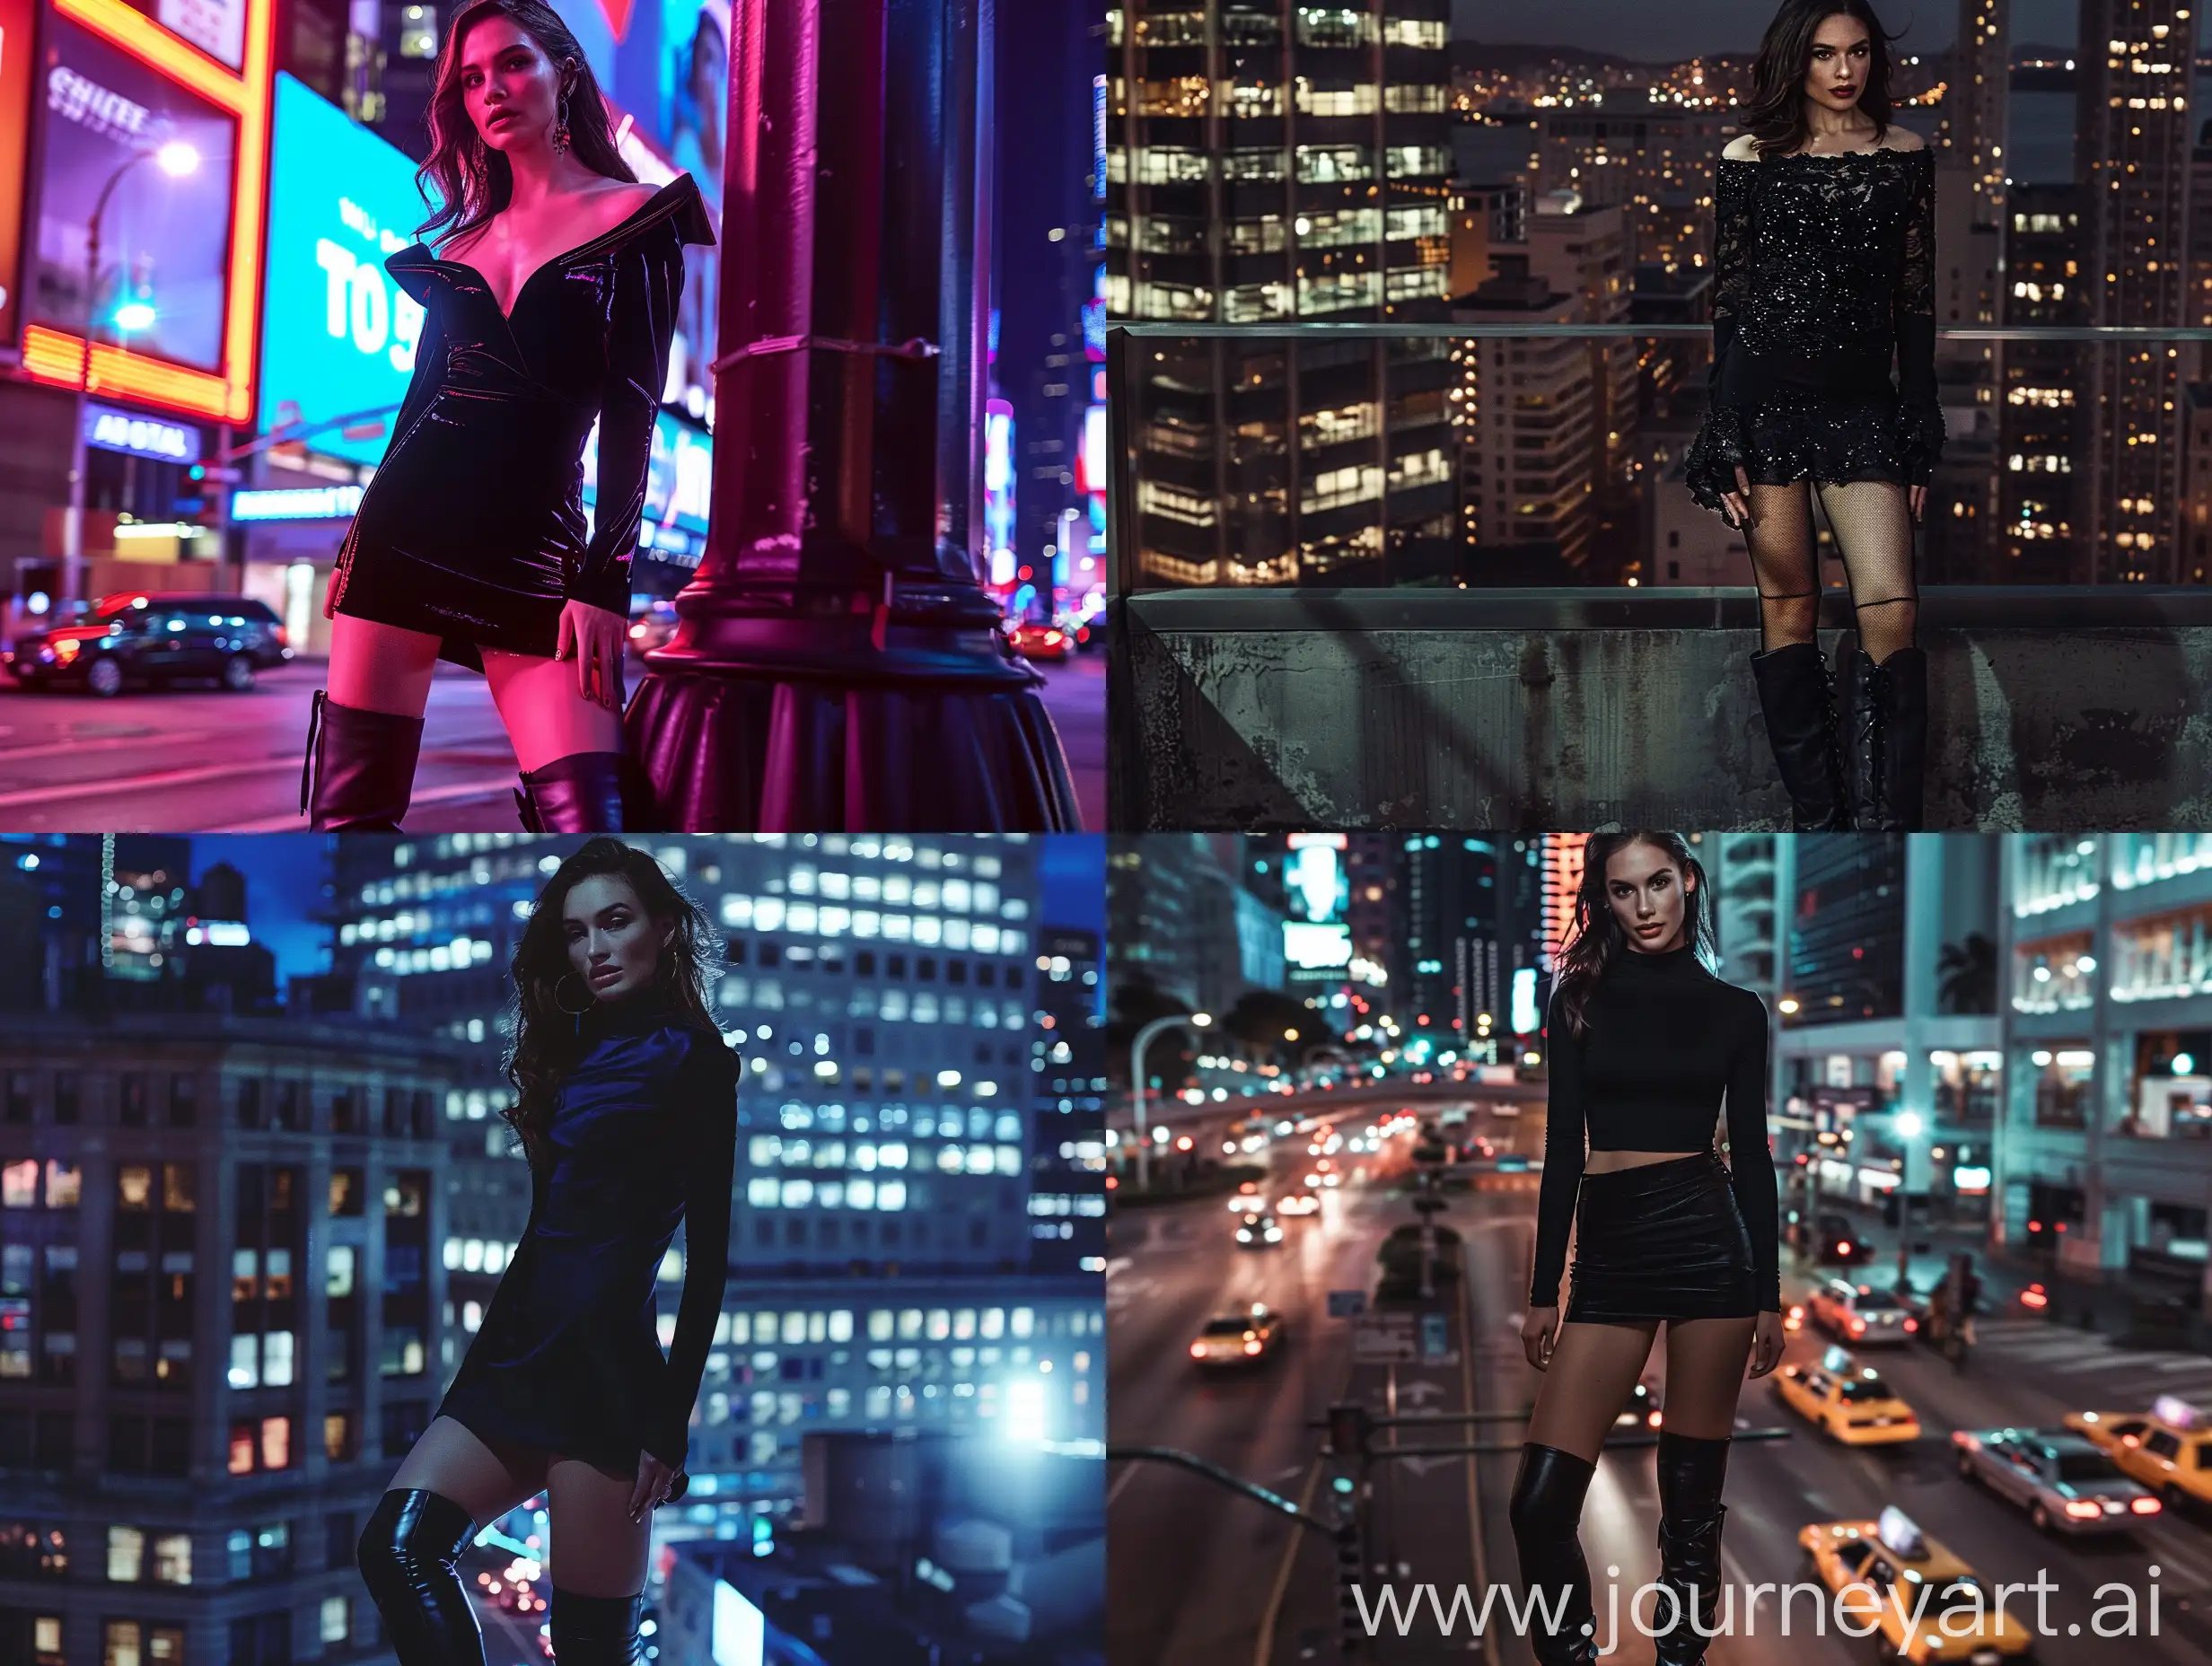 Gal-Gadot-in-Stylish-Black-Dress-and-KneeHigh-Boots-in-City-Night-Scene